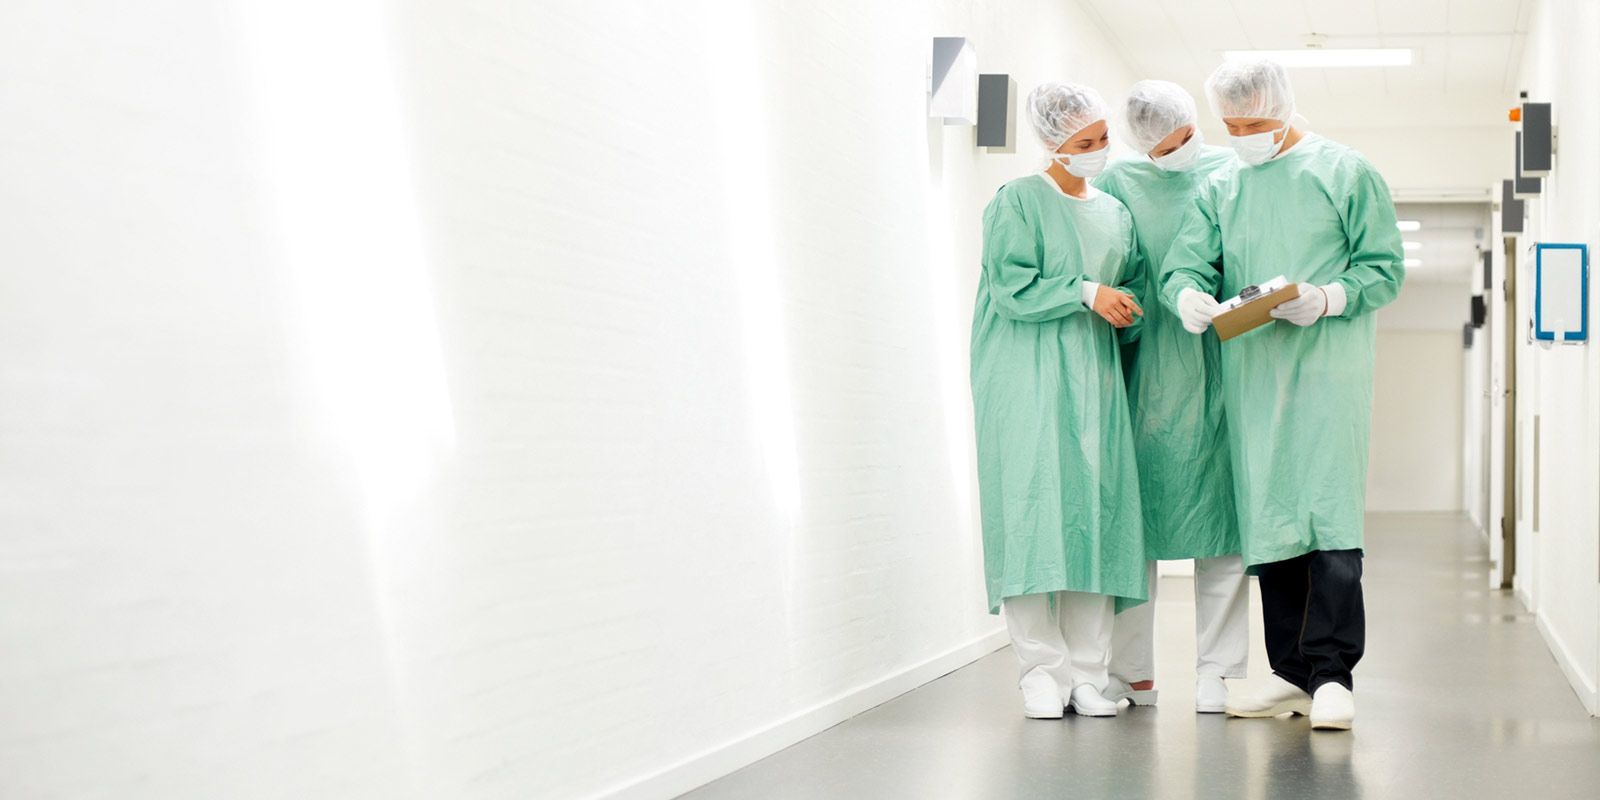 Three people of different genders in surgical clothing are standing in a hospital corridor discussing something